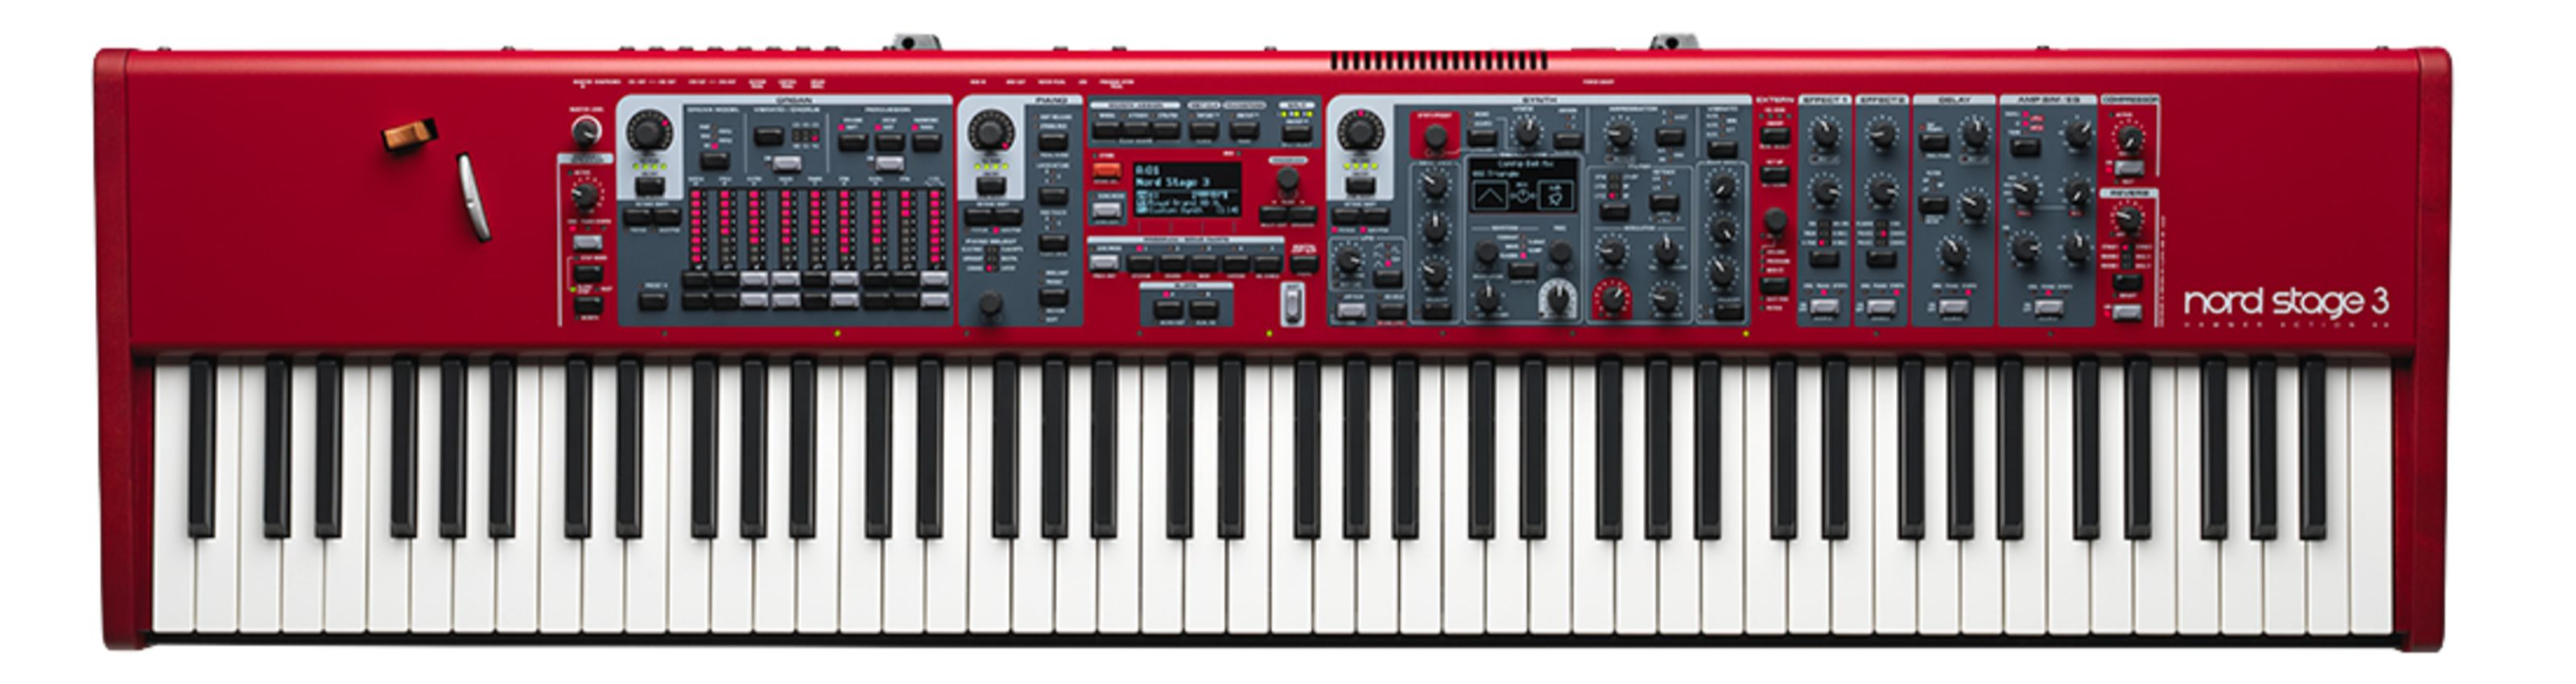 Clavia Nord Stage 3 88 B-Ware | MUSIC STORE professional